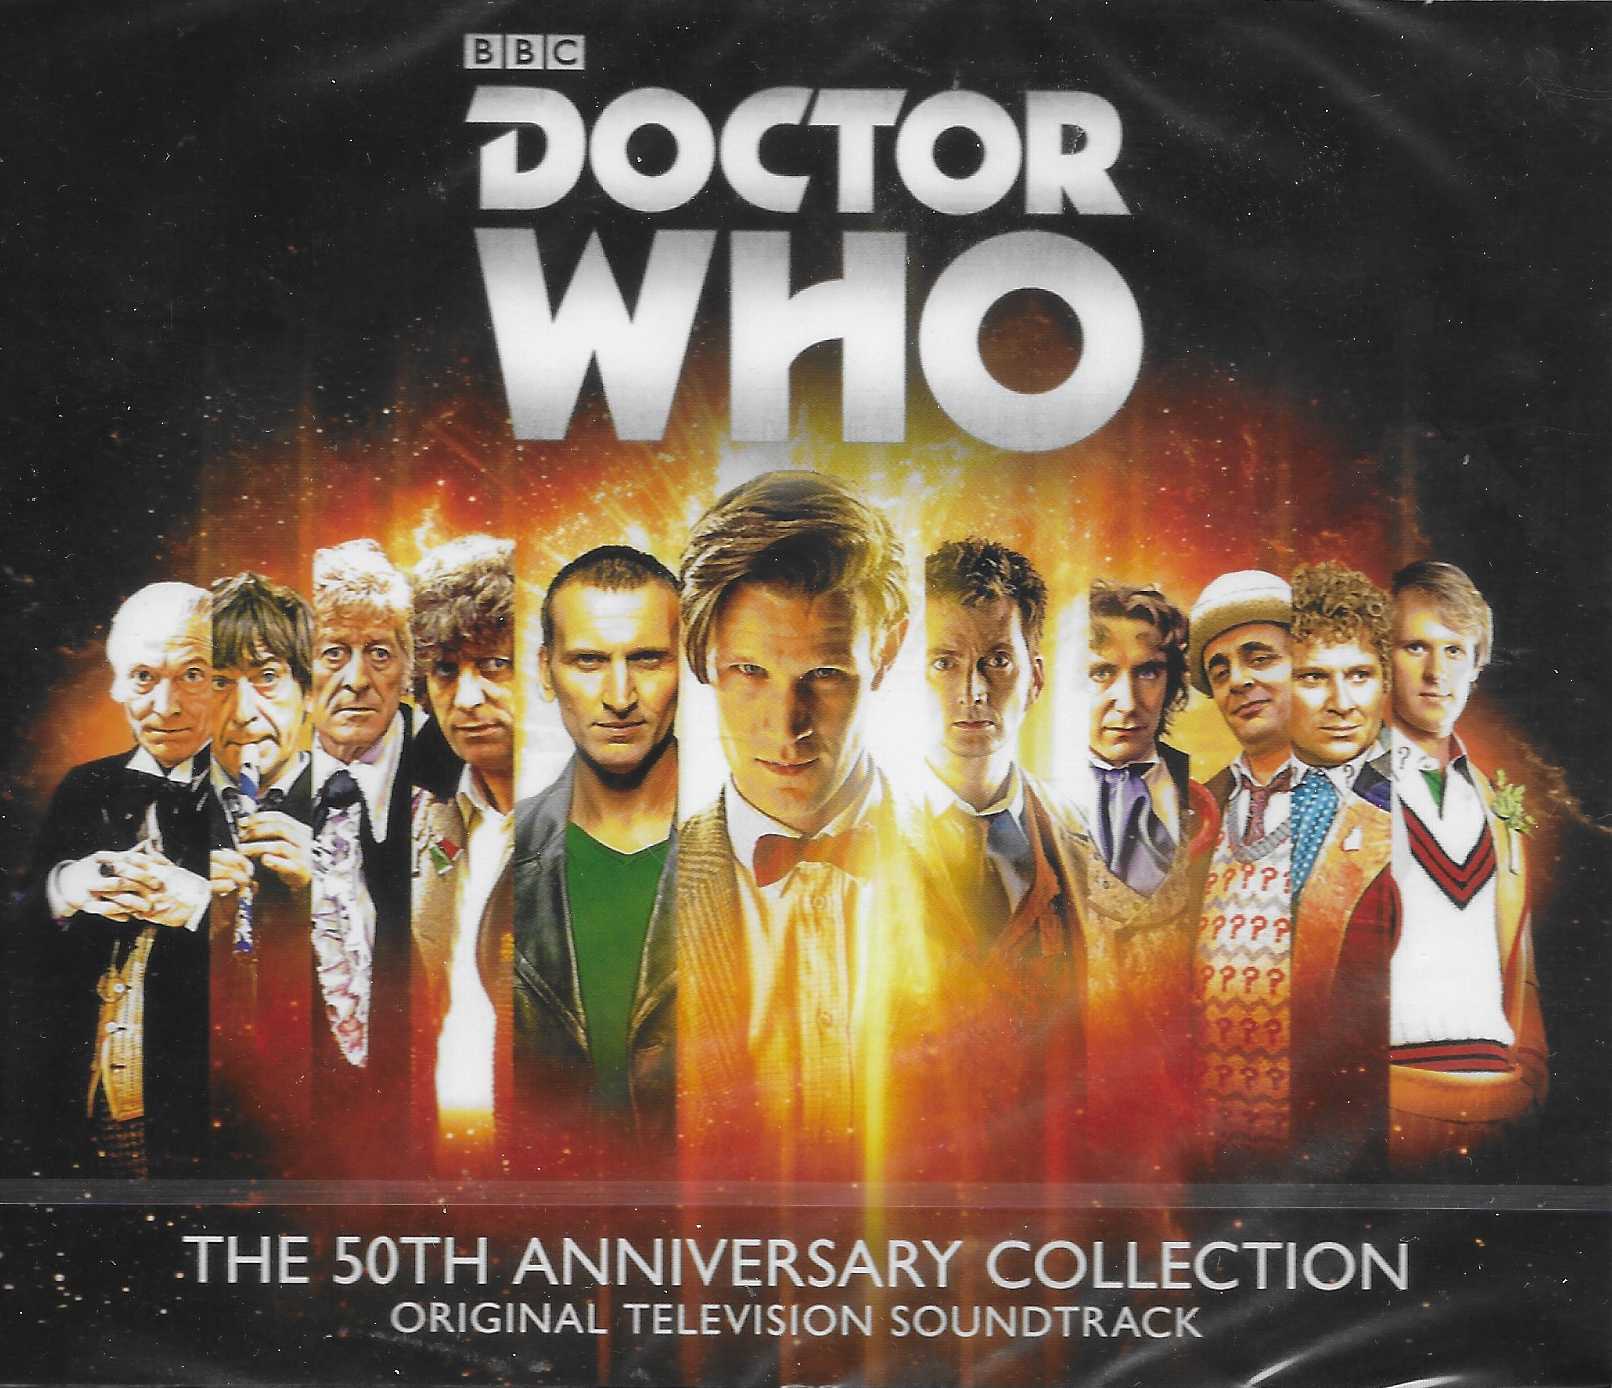 Picture of Doctor Who - The 50th anniversary collection by artist Various from the BBC cds - Records and Tapes library